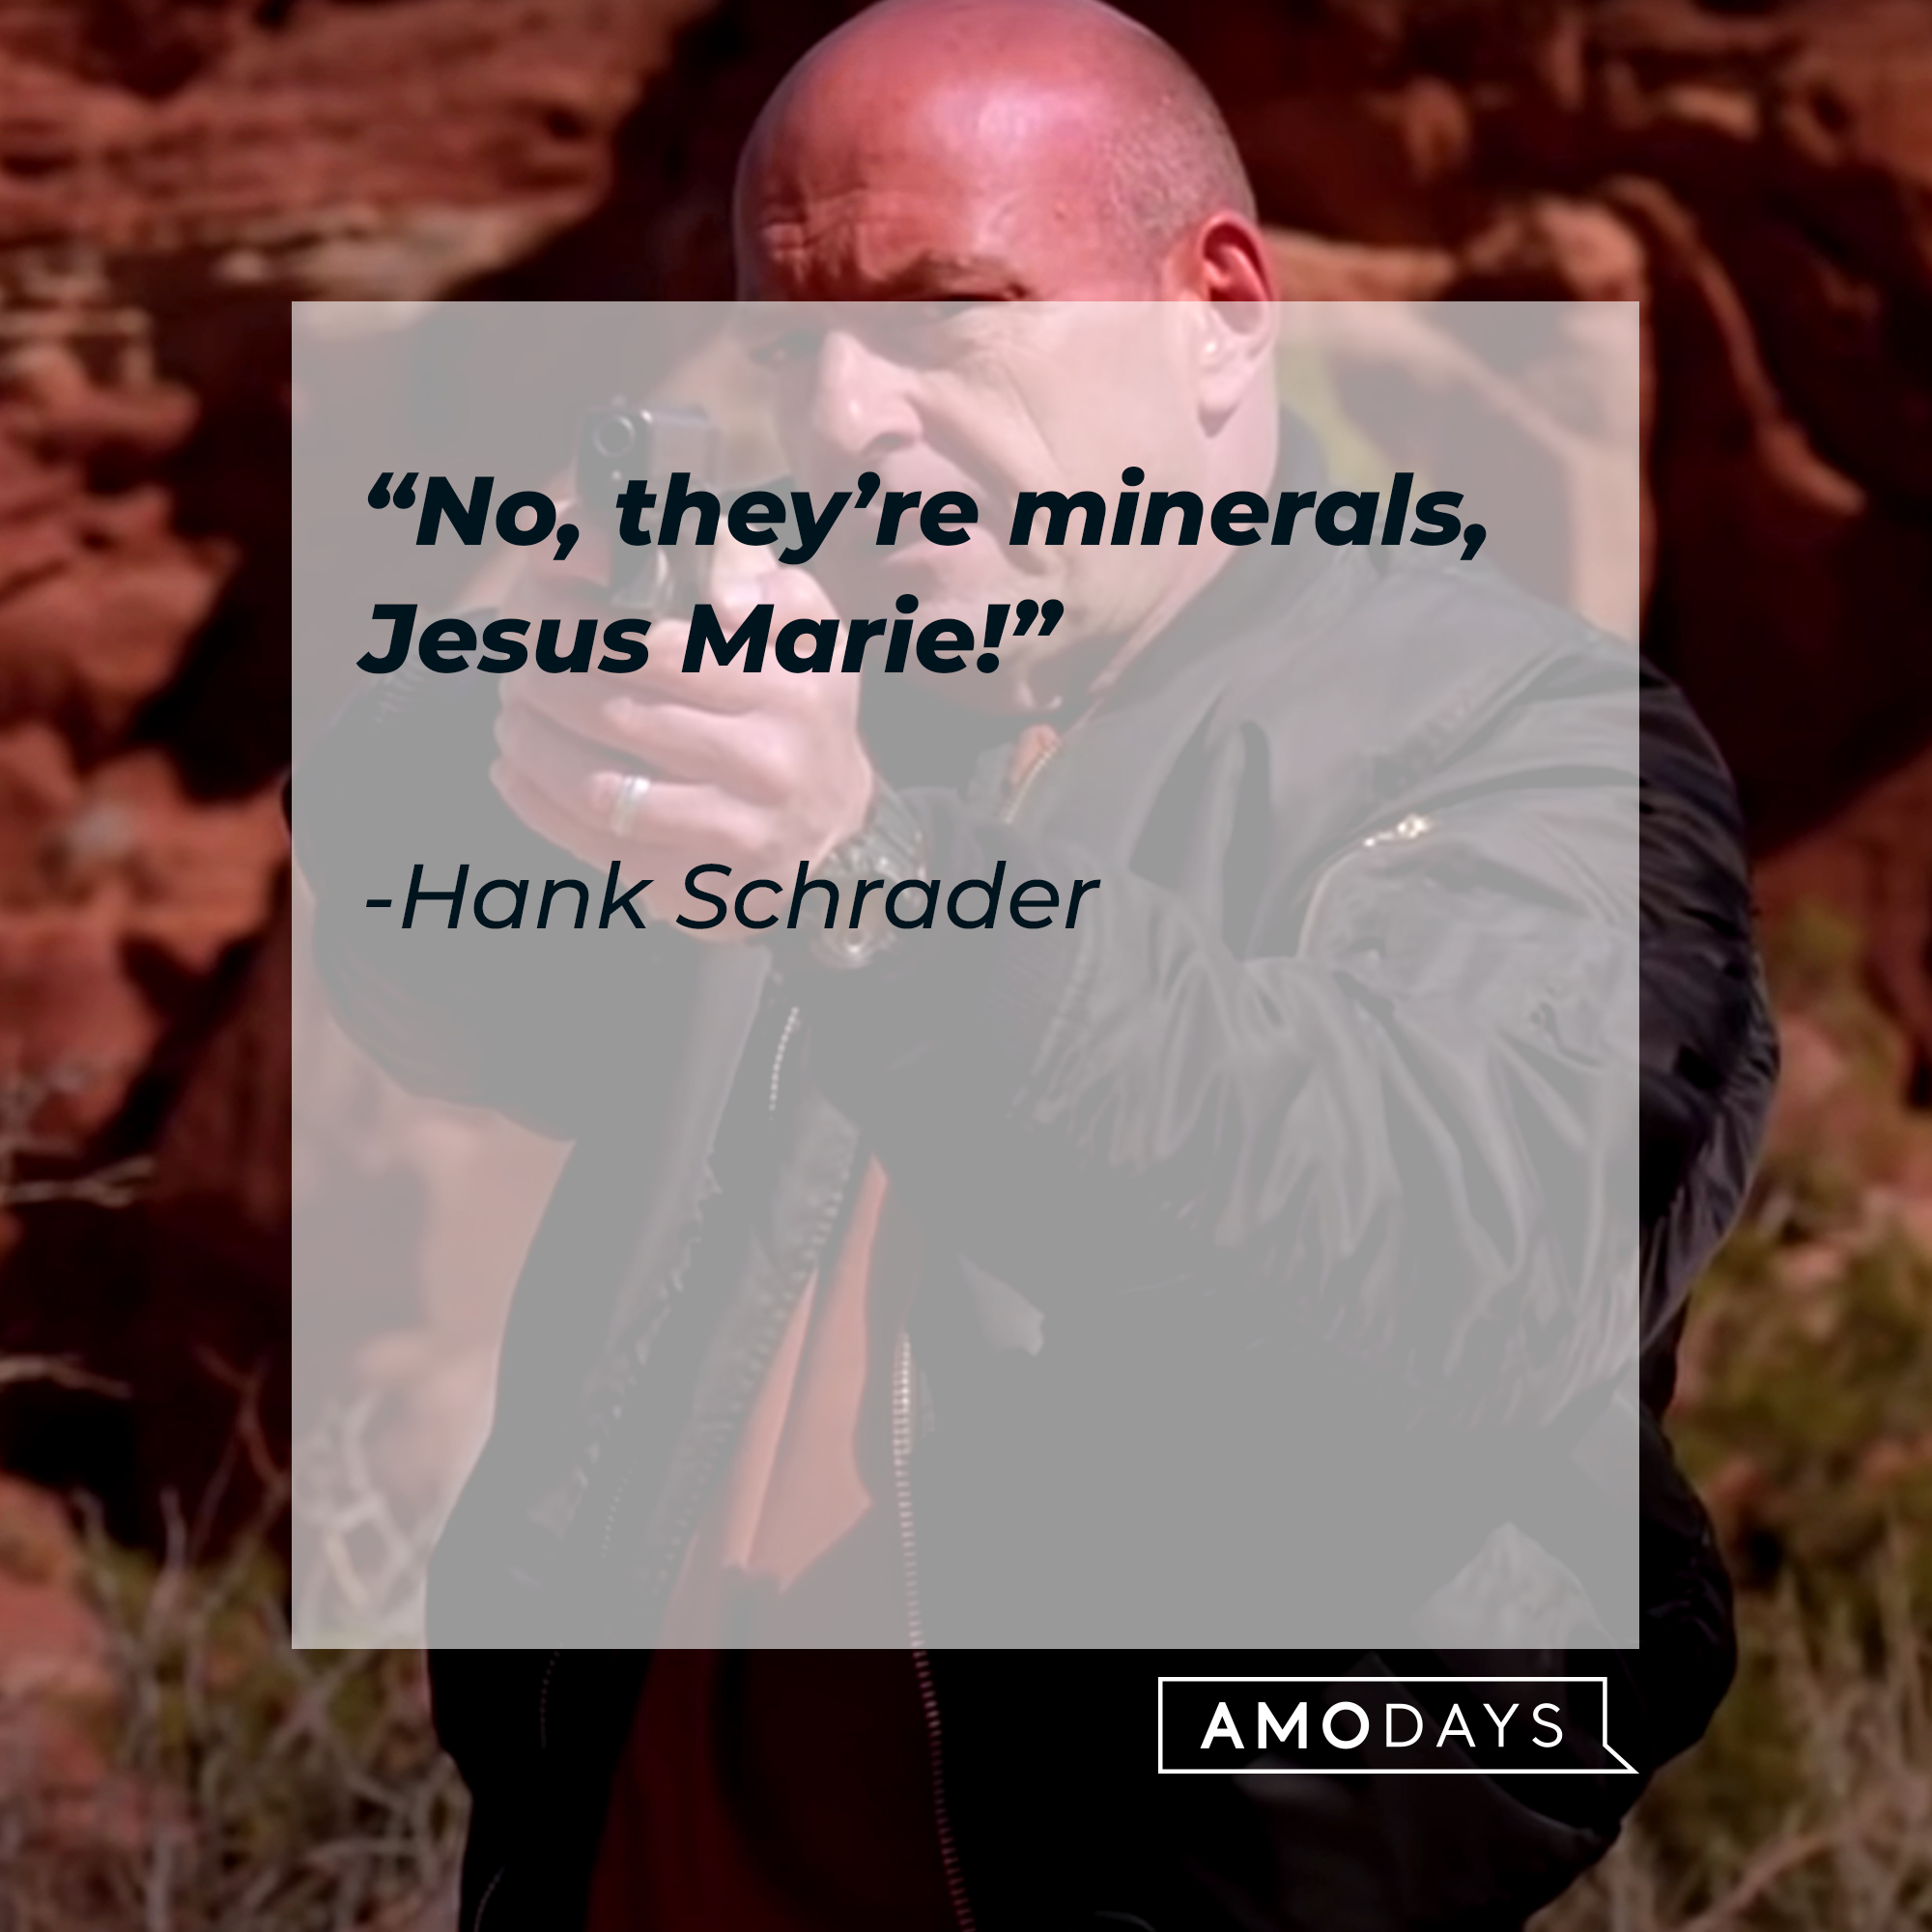 An image of Hank Schrader, with his quote: “No, they’re minerals, Jesus Marie!” | Source: Youtube.com/breakingbad